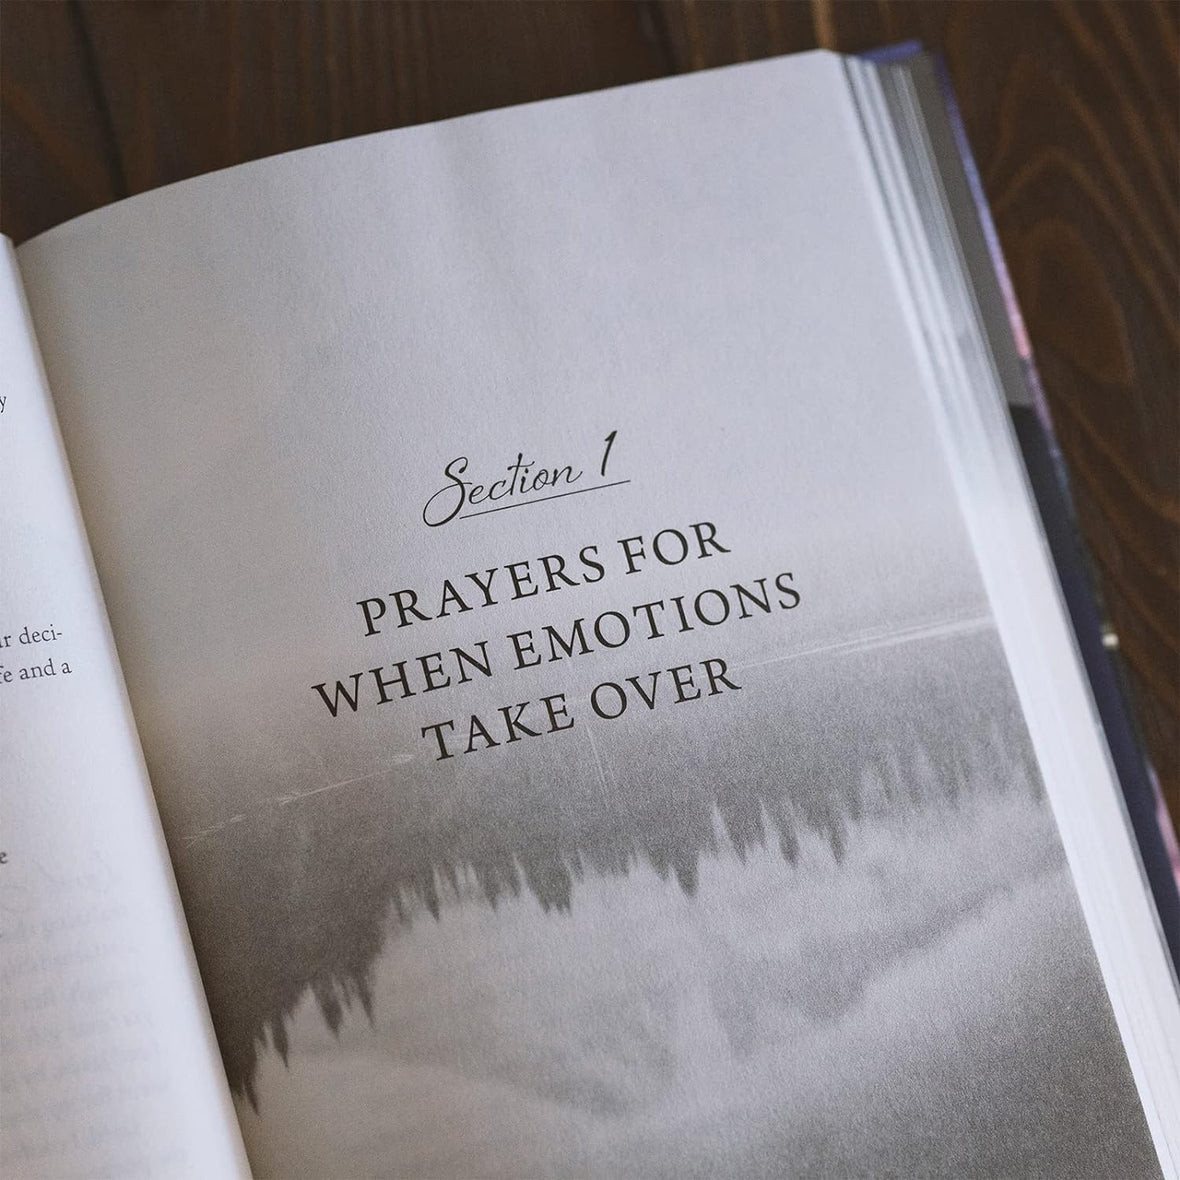 When You Don't Know What to Pray: 100 Essential Prayers for Enduring Life's Storms